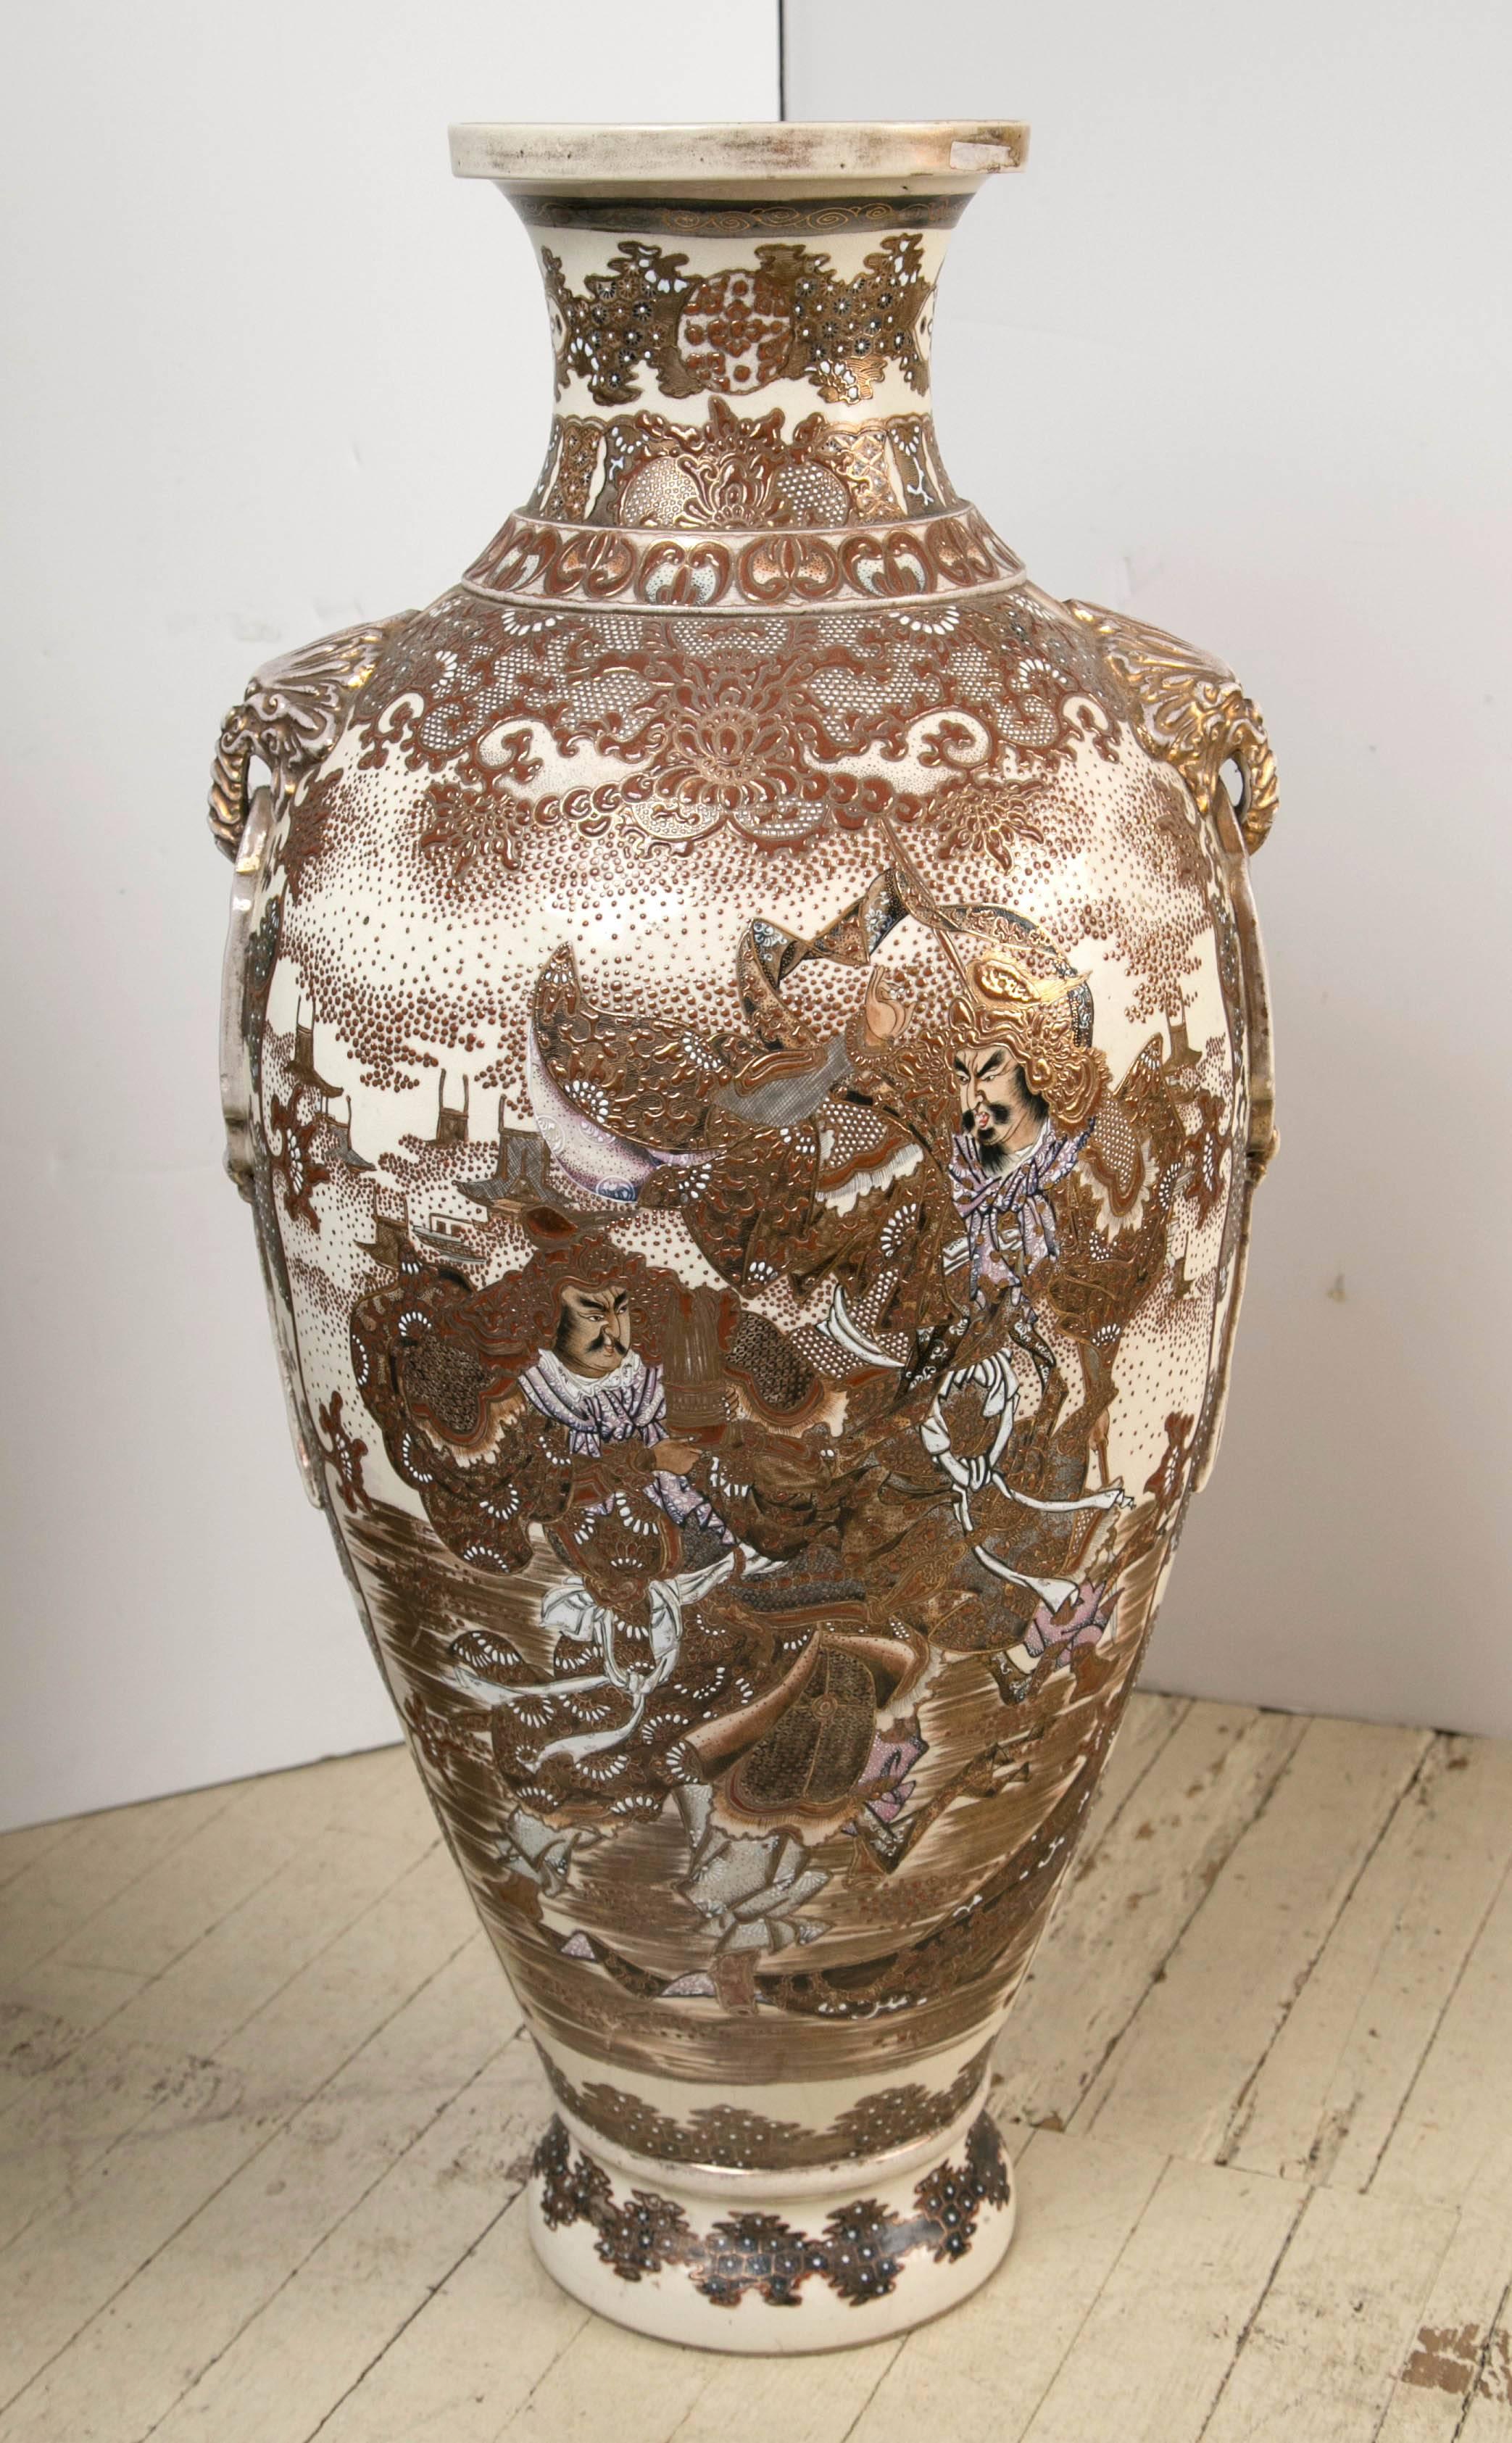 These antique Satsuma vases have an off-white ground to which hand painting and gilding have been applied. Extremely fine decorations of florals, vines, leaves and what appear to be war lords or samurai, one of whom seems to be playing a flute.